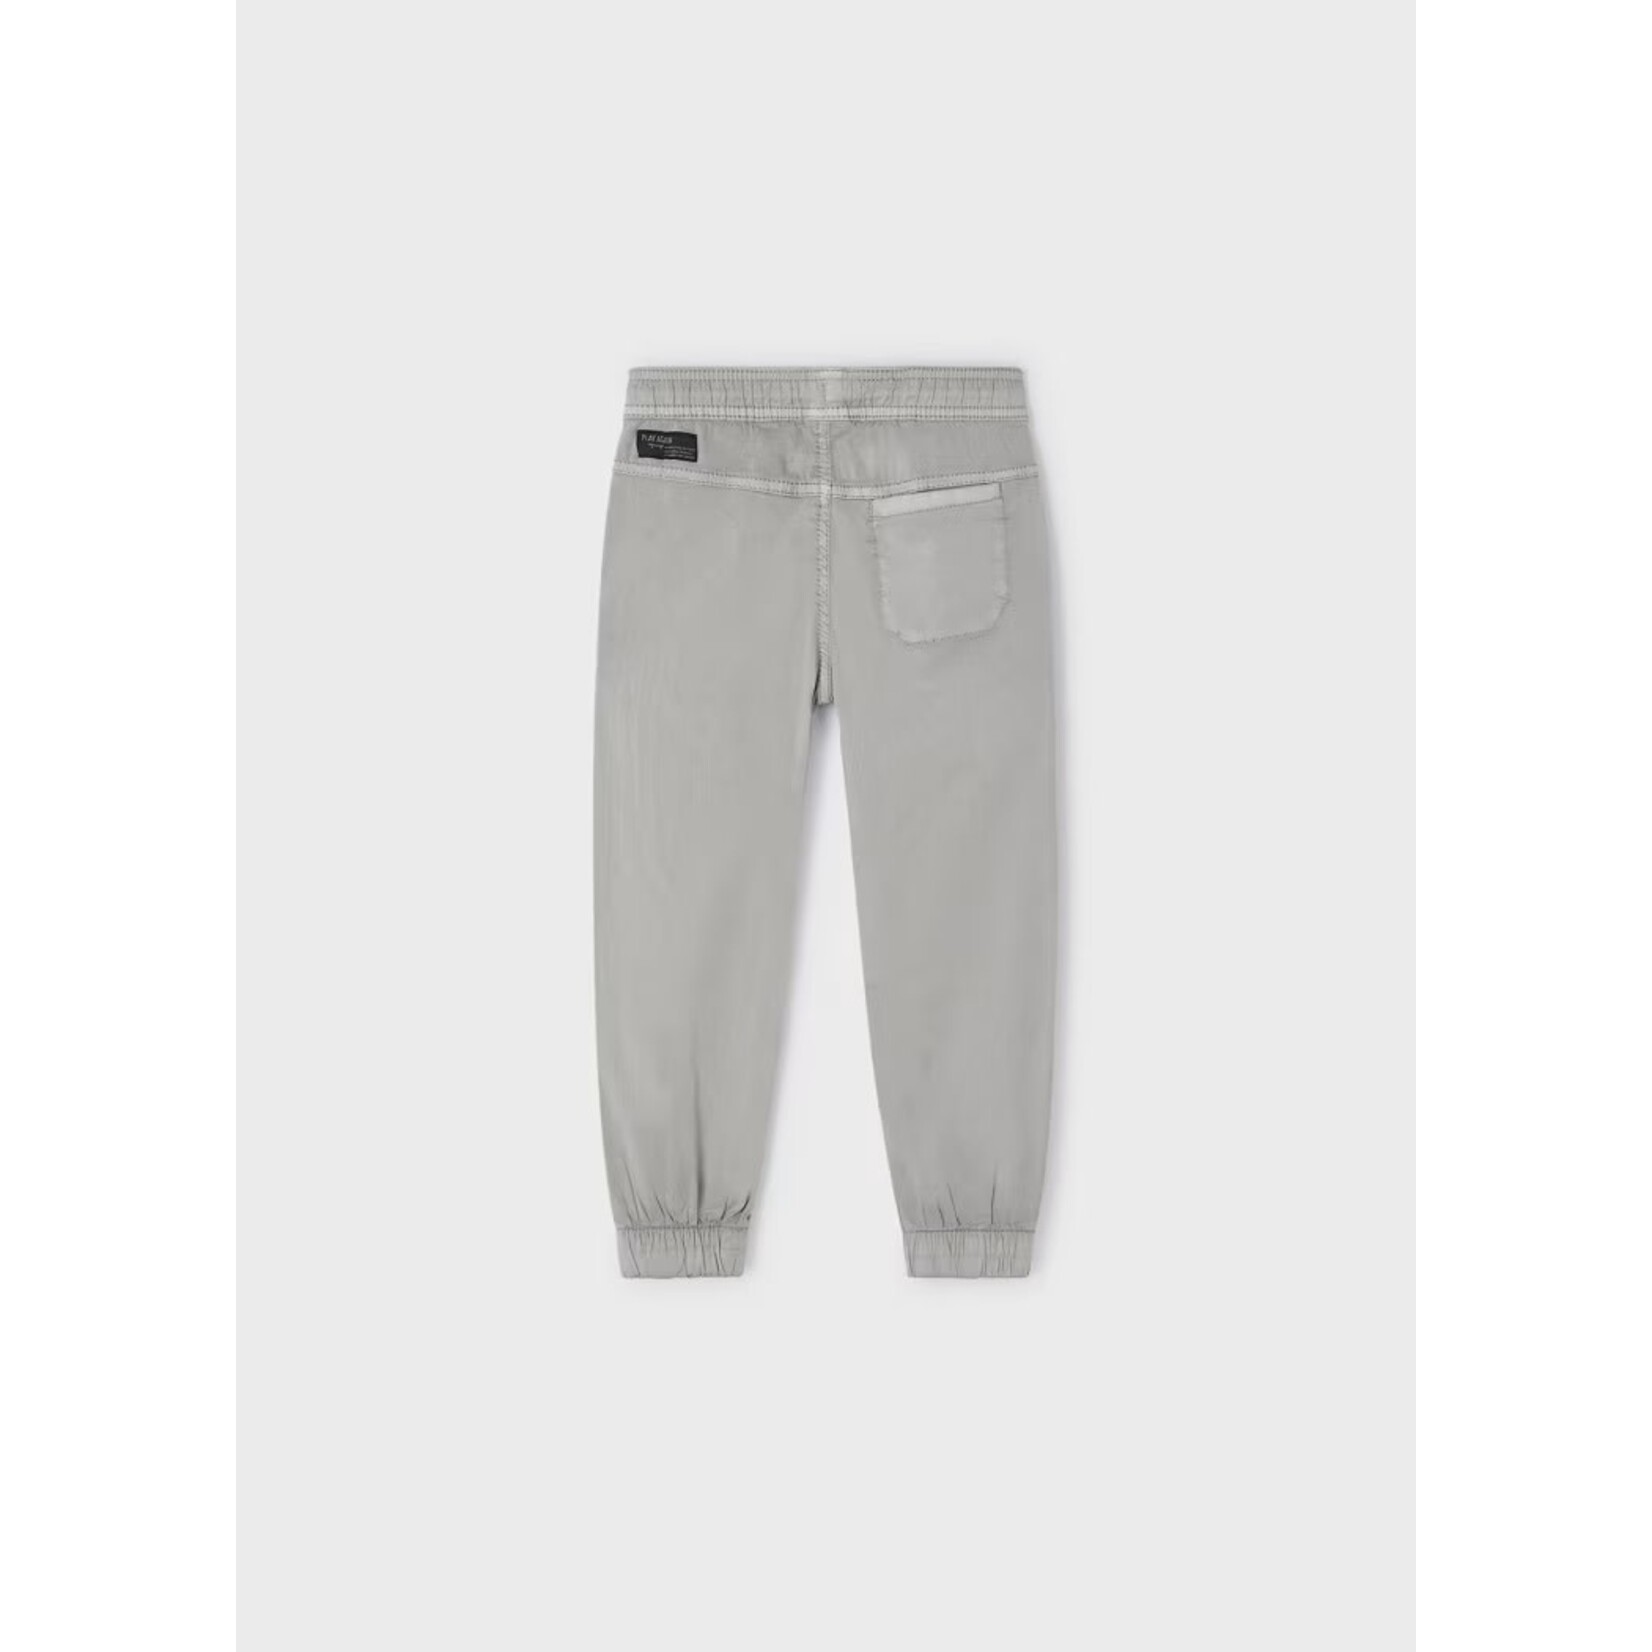 Mayoral MAYORAL - Light grey canvas pants with elasticated waist